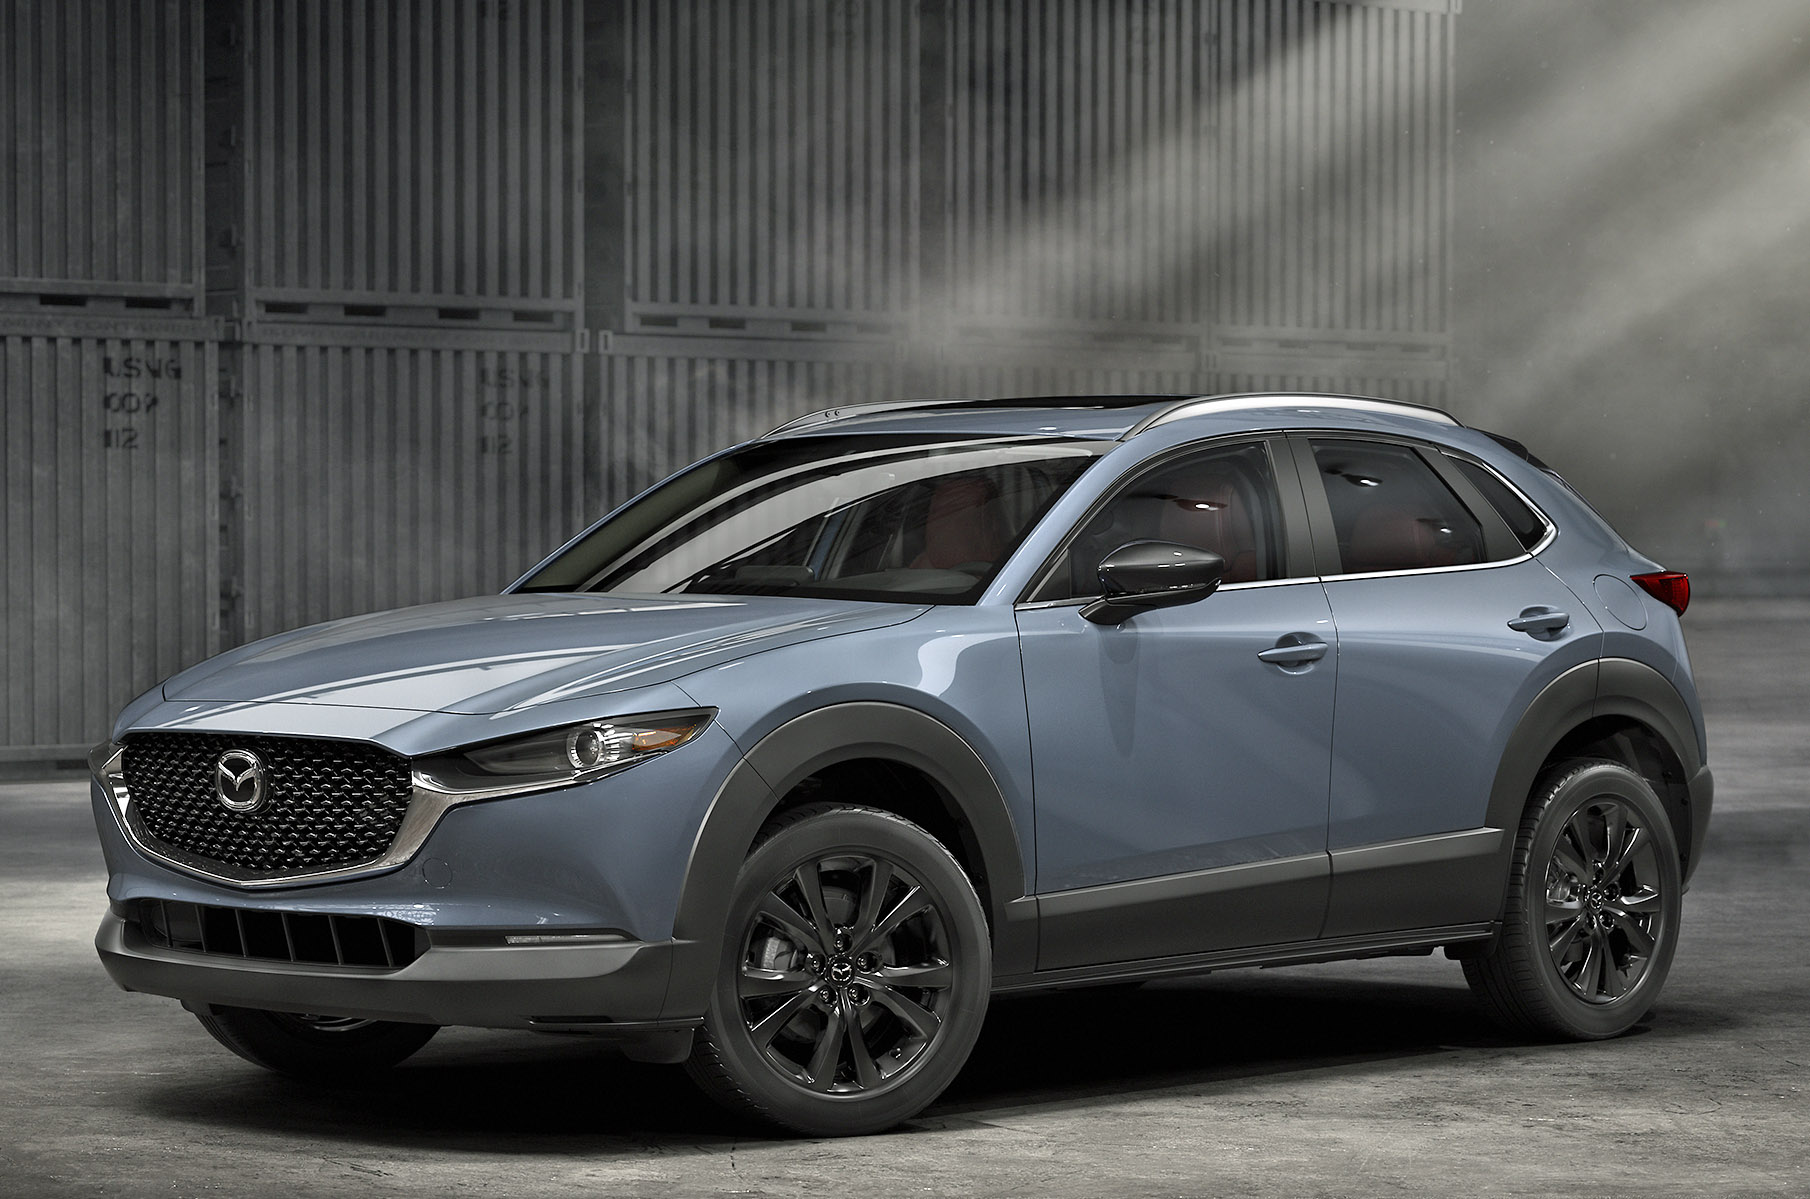 Mazda Has Three Sporty Crossovers With Awd Available Turbo Engines